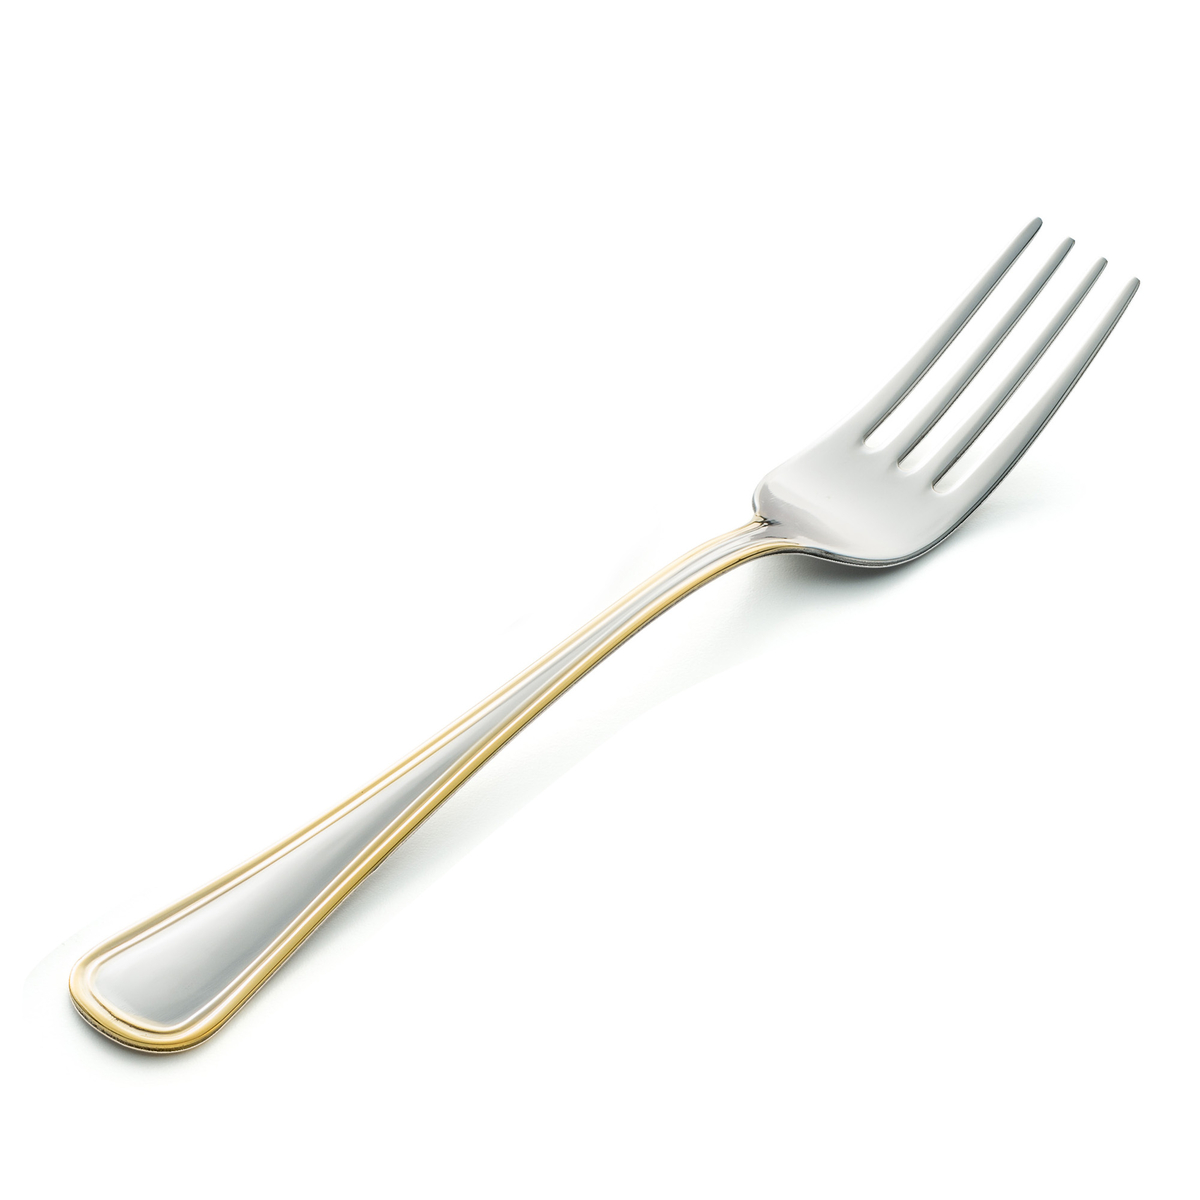 EME Stainless Steel Table Fork, Galesoro X30, 2 Pcs